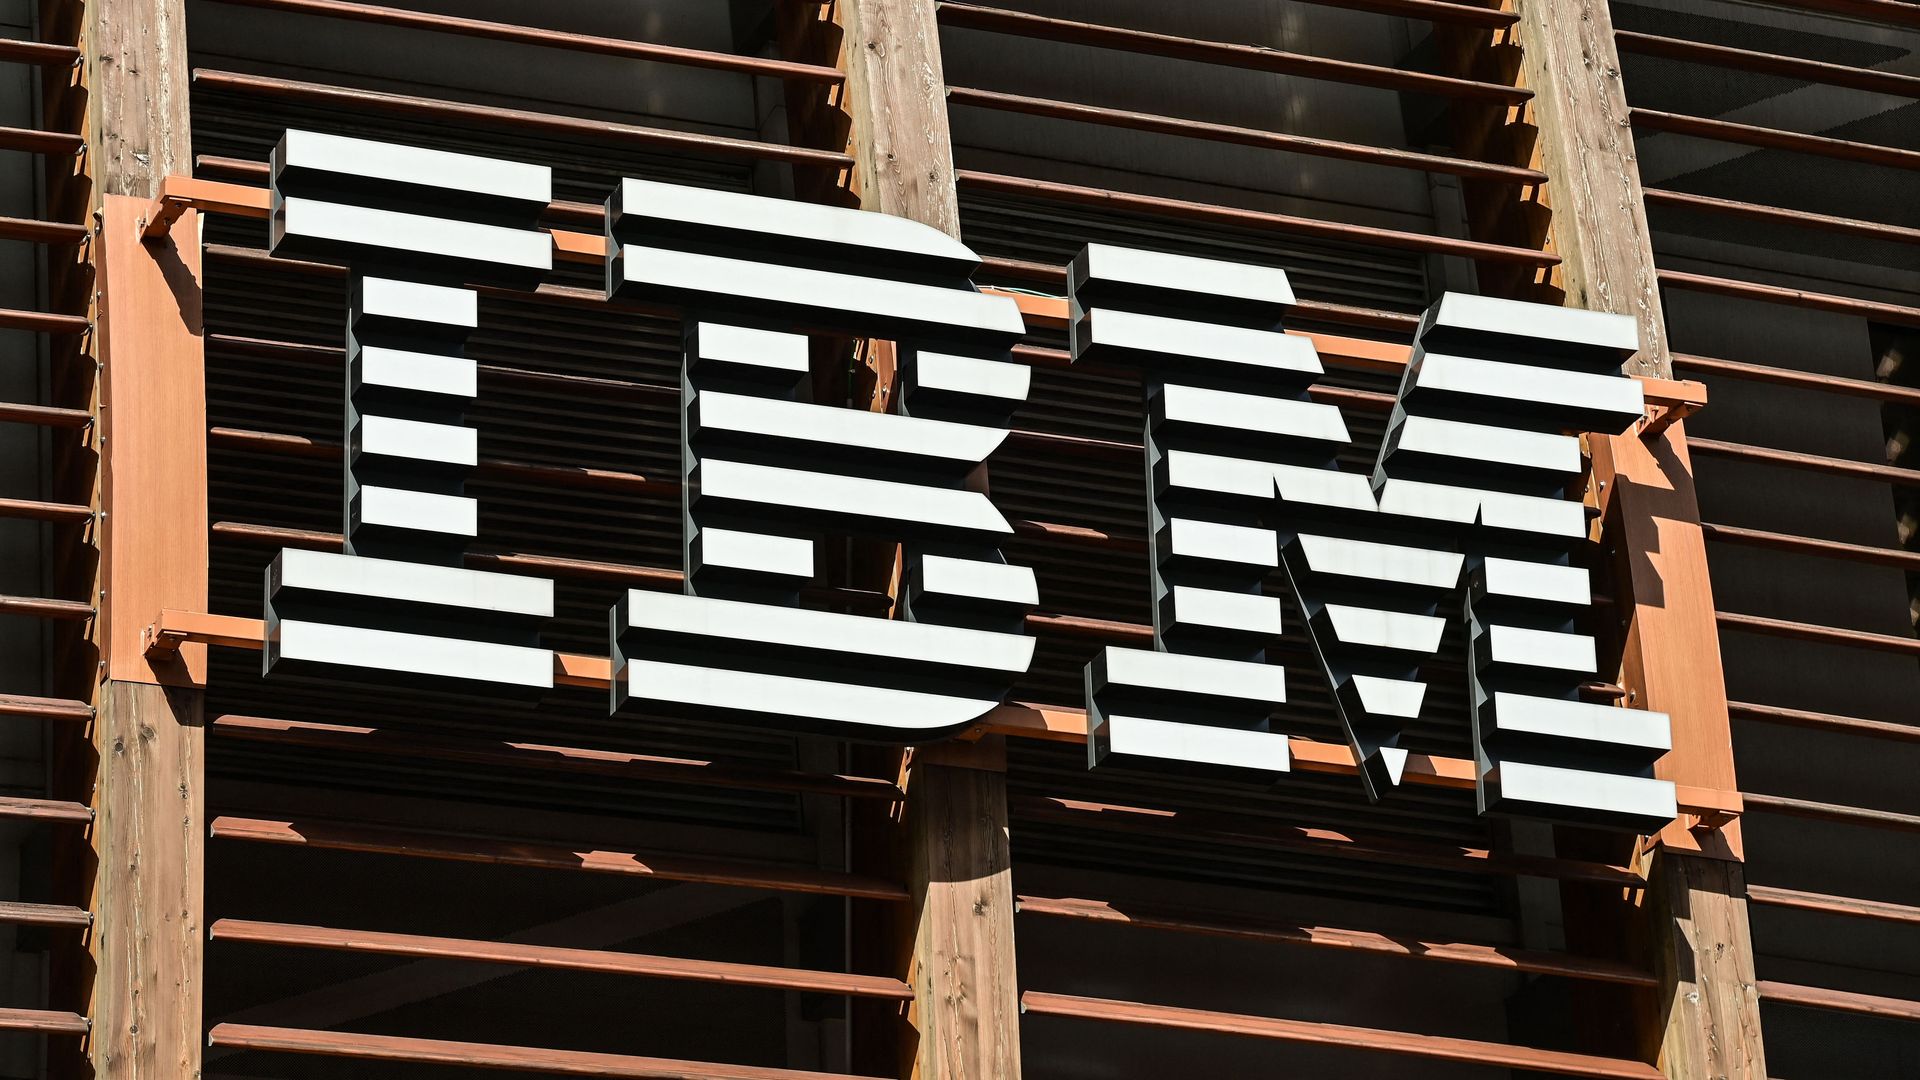 The IBM logo is pictured.